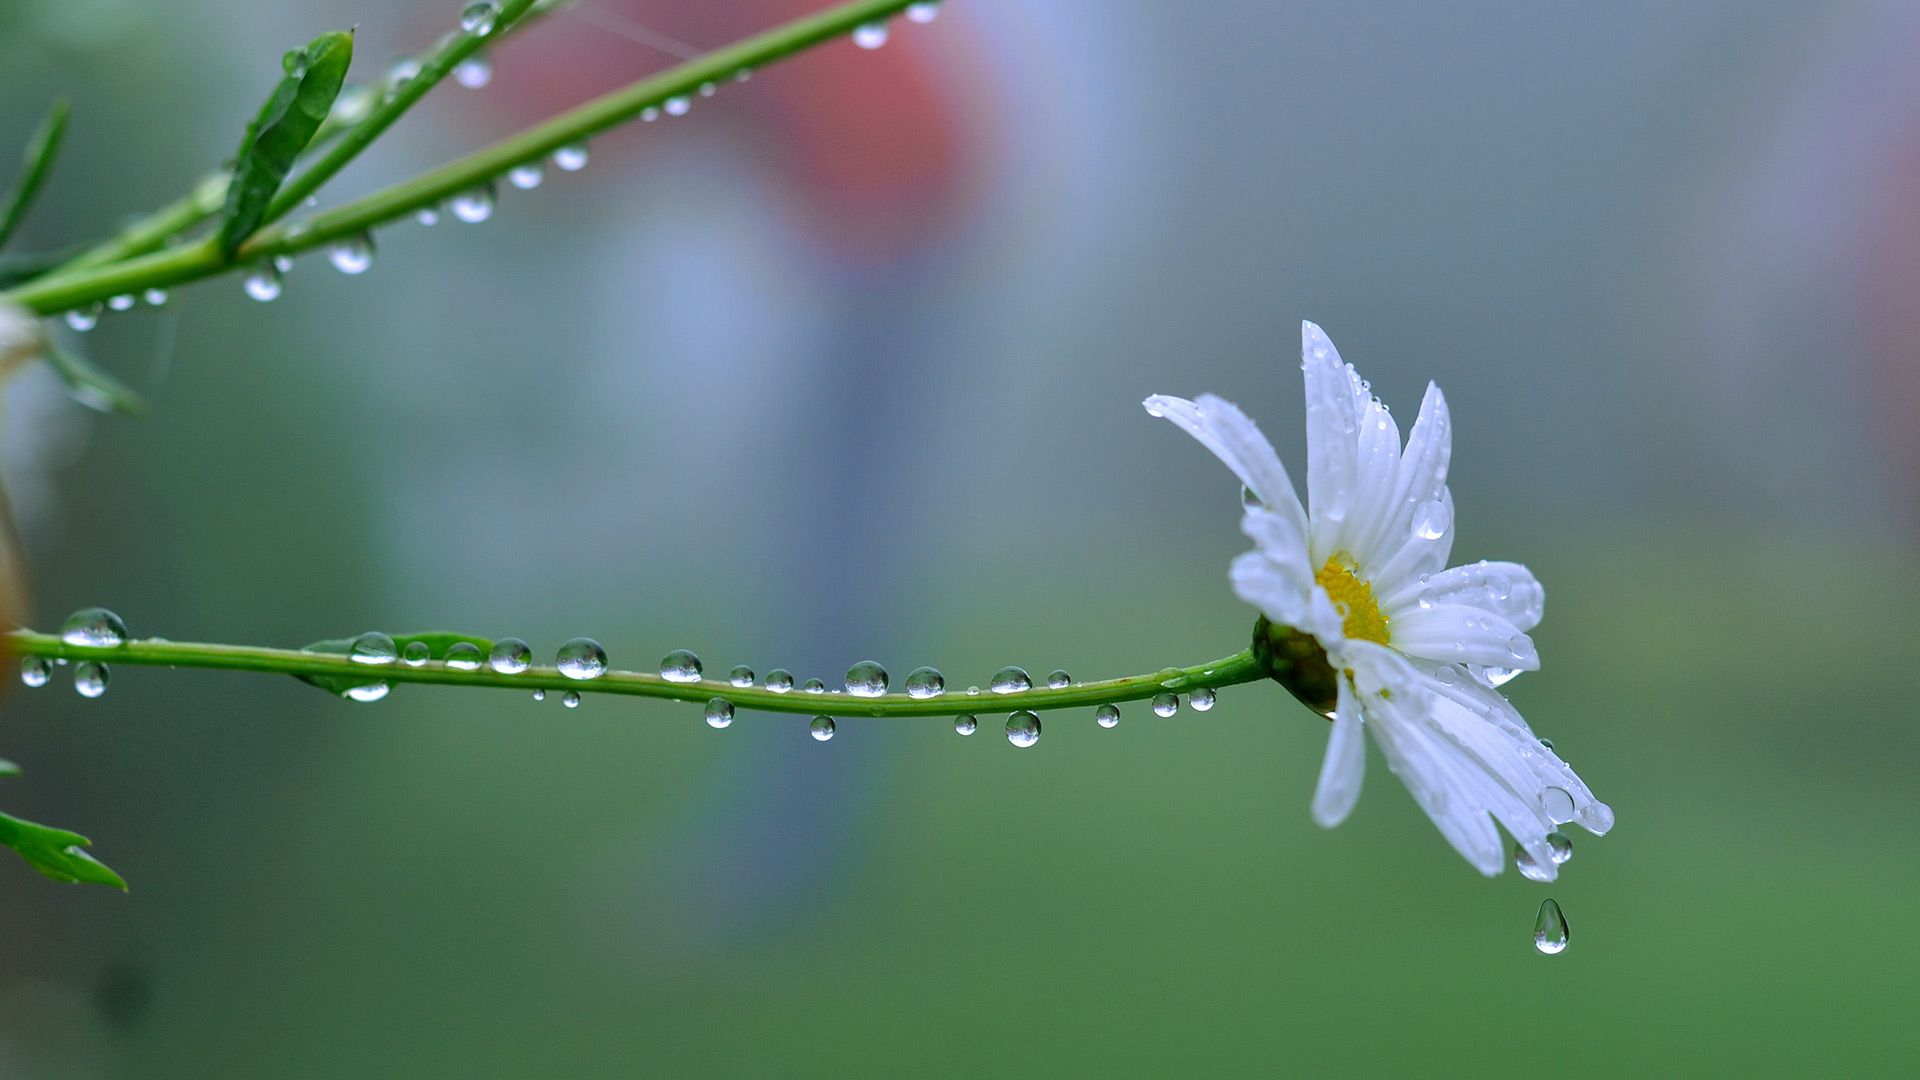 Water dripping from a flower